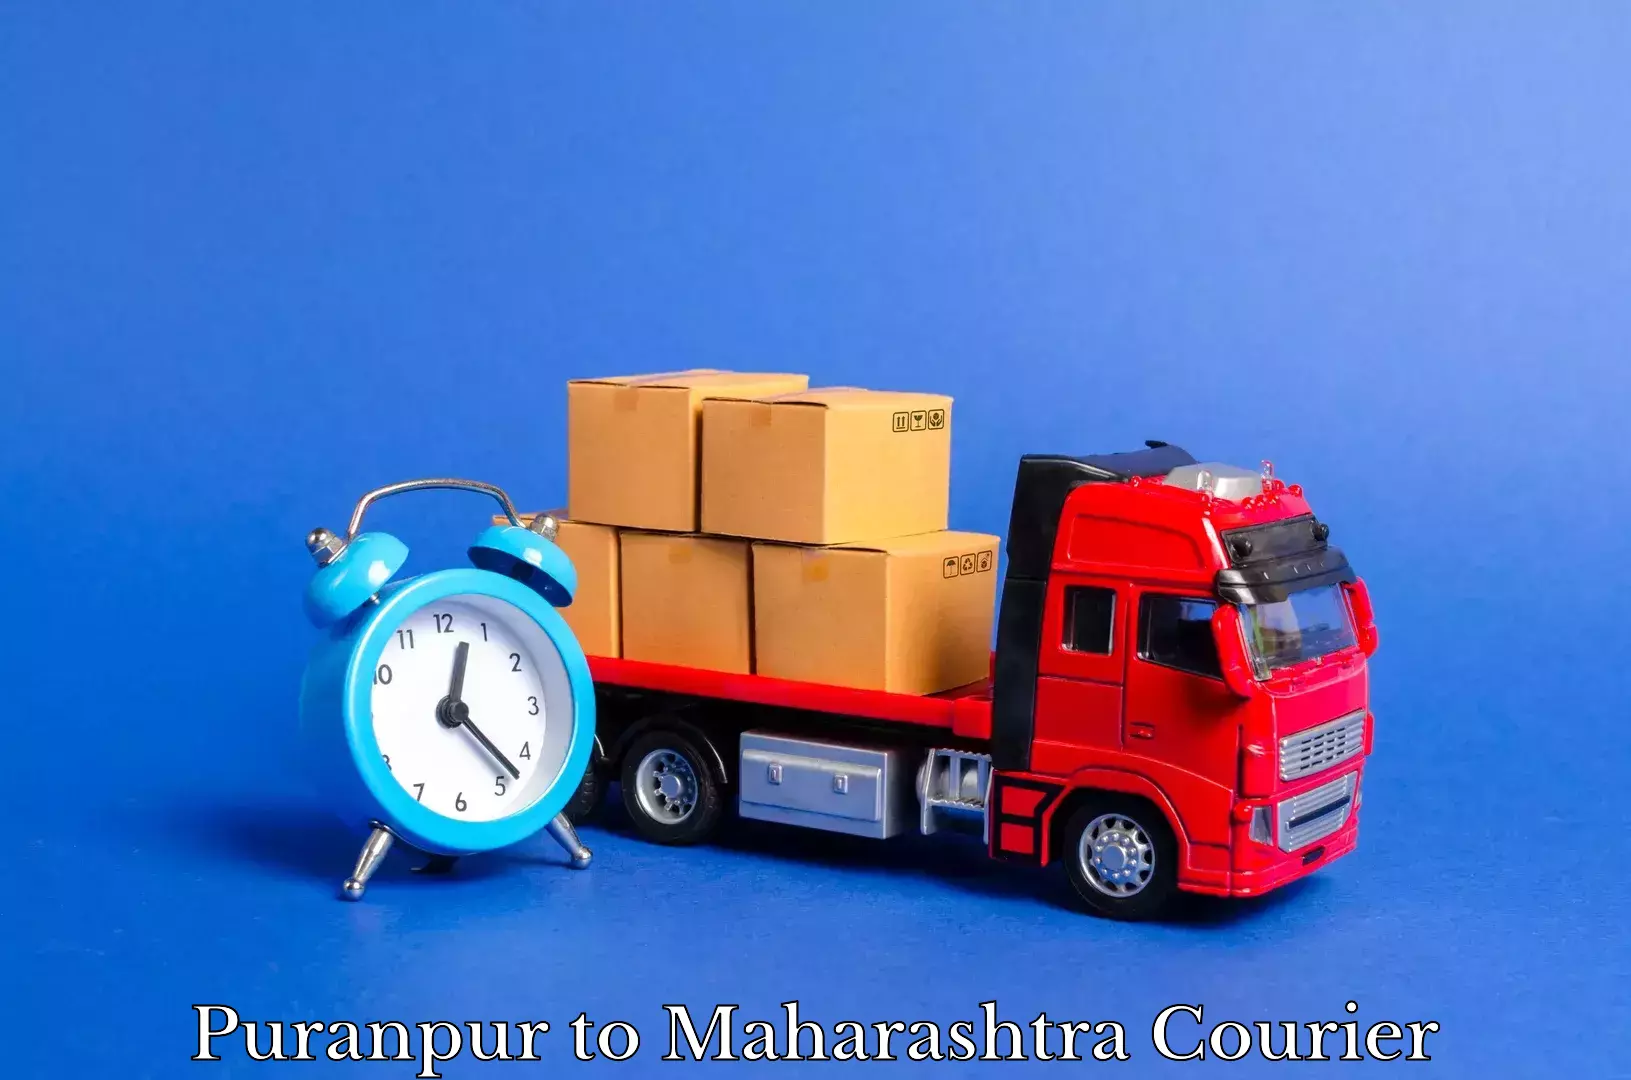 Trusted relocation experts Puranpur to Thane